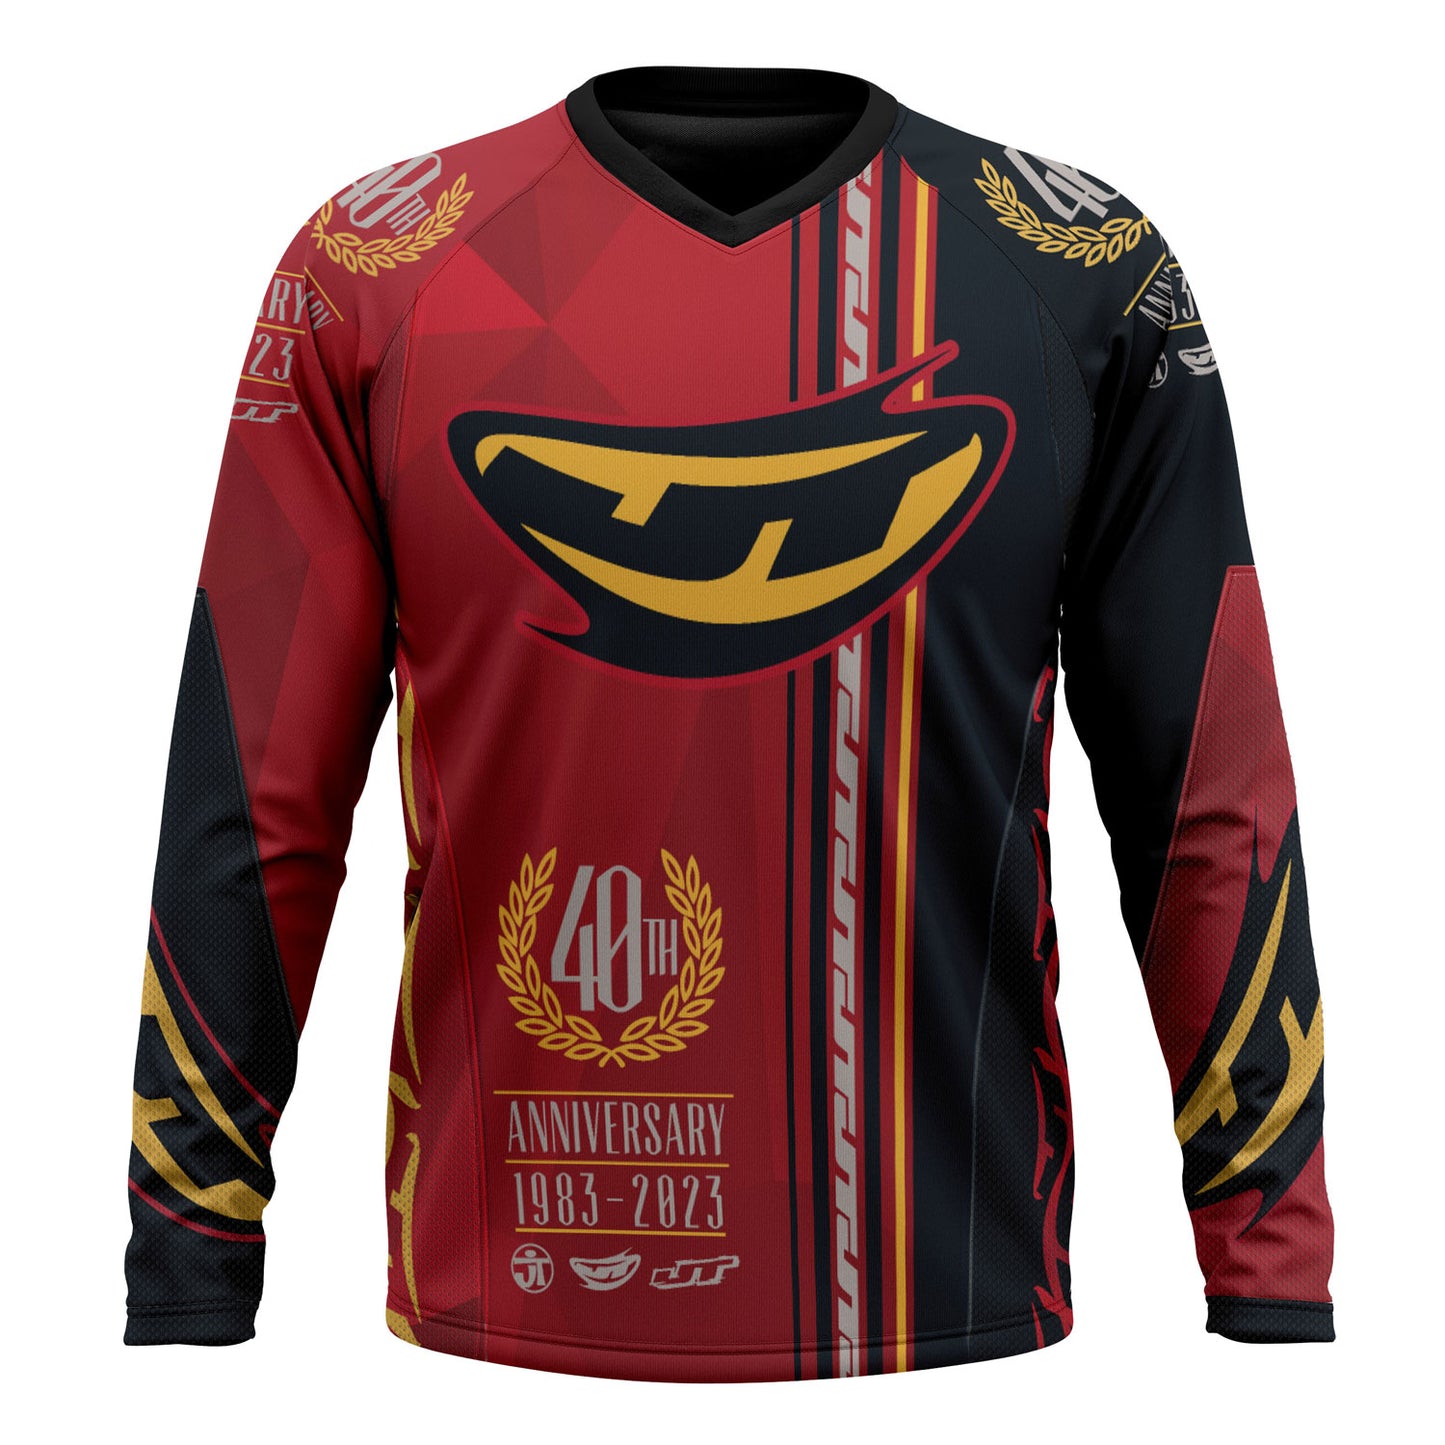 JT 40th Anniversary Contact Jersey - Discounted if you own the JT 40th Anniversary Proflex Goggle